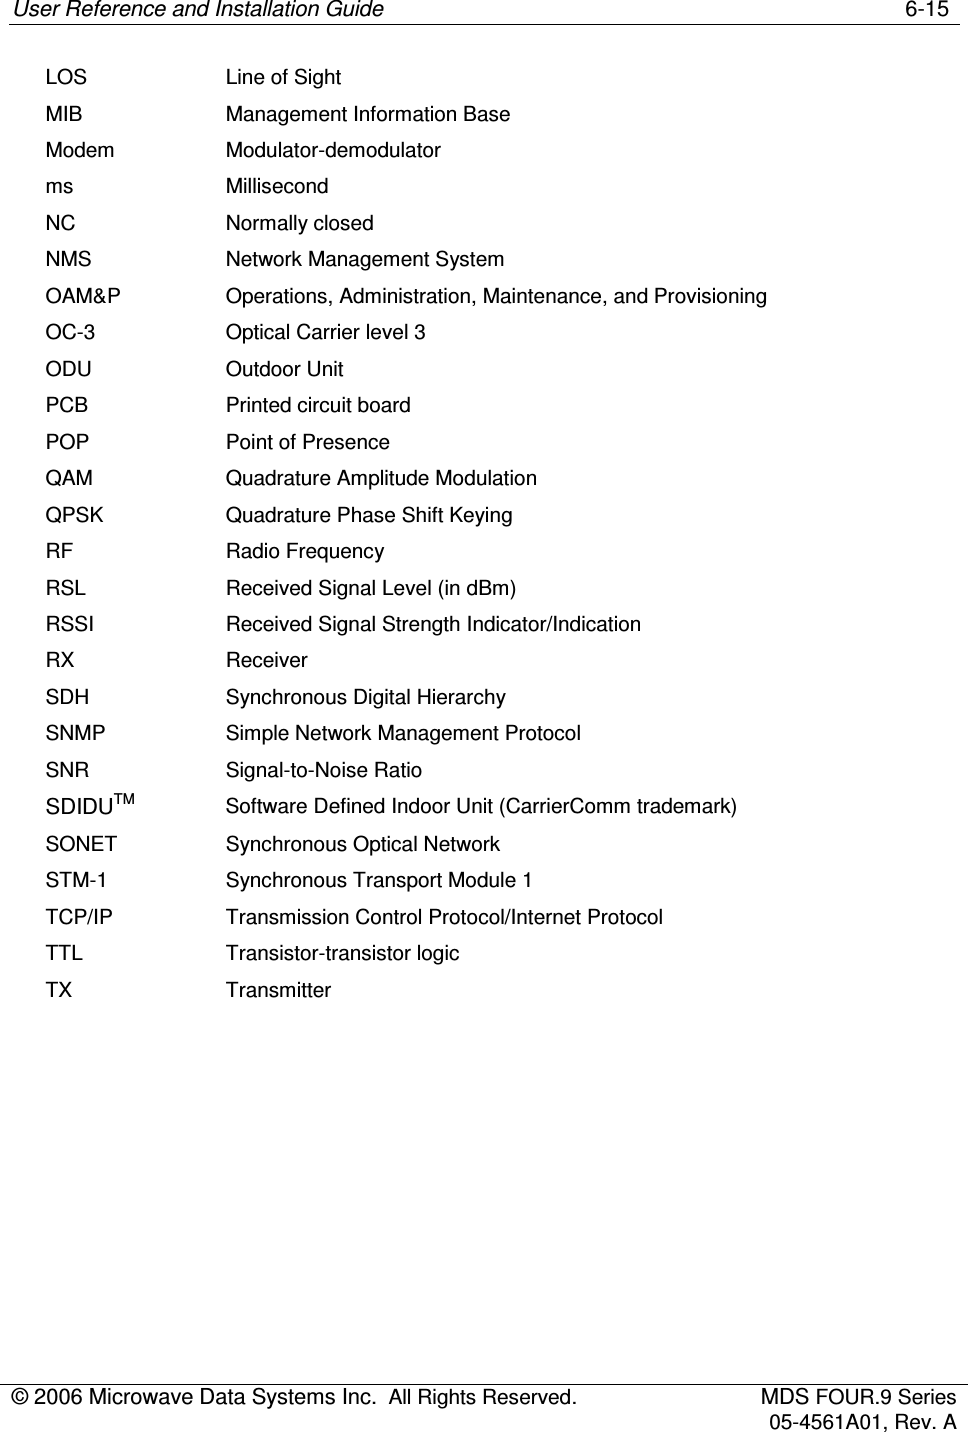 User Reference and Installation Guide    6-15 © 2006 Microwave Data Systems Inc.  All Rights Reserved.  MDS FOUR.9 Series 05-4561A01, Rev. A  LOS  Line of Sight MIB  Management Information Base Modem  Modulator-demodulator ms  Millisecond NC  Normally closed NMS  Network Management System OAM&amp;P  Operations, Administration, Maintenance, and Provisioning OC-3  Optical Carrier level 3 ODU  Outdoor Unit PCB  Printed circuit board POP  Point of Presence QAM  Quadrature Amplitude Modulation QPSK  Quadrature Phase Shift Keying RF  Radio Frequency RSL  Received Signal Level (in dBm) RSSI  Received Signal Strength Indicator/Indication RX  Receiver SDH  Synchronous Digital Hierarchy SNMP  Simple Network Management Protocol SNR  Signal-to-Noise Ratio SDIDUTM Software Defined Indoor Unit (CarrierComm trademark) SONET  Synchronous Optical Network STM-1  Synchronous Transport Module 1 TCP/IP  Transmission Control Protocol/Internet Protocol TTL  Transistor-transistor logic TX  Transmitter  